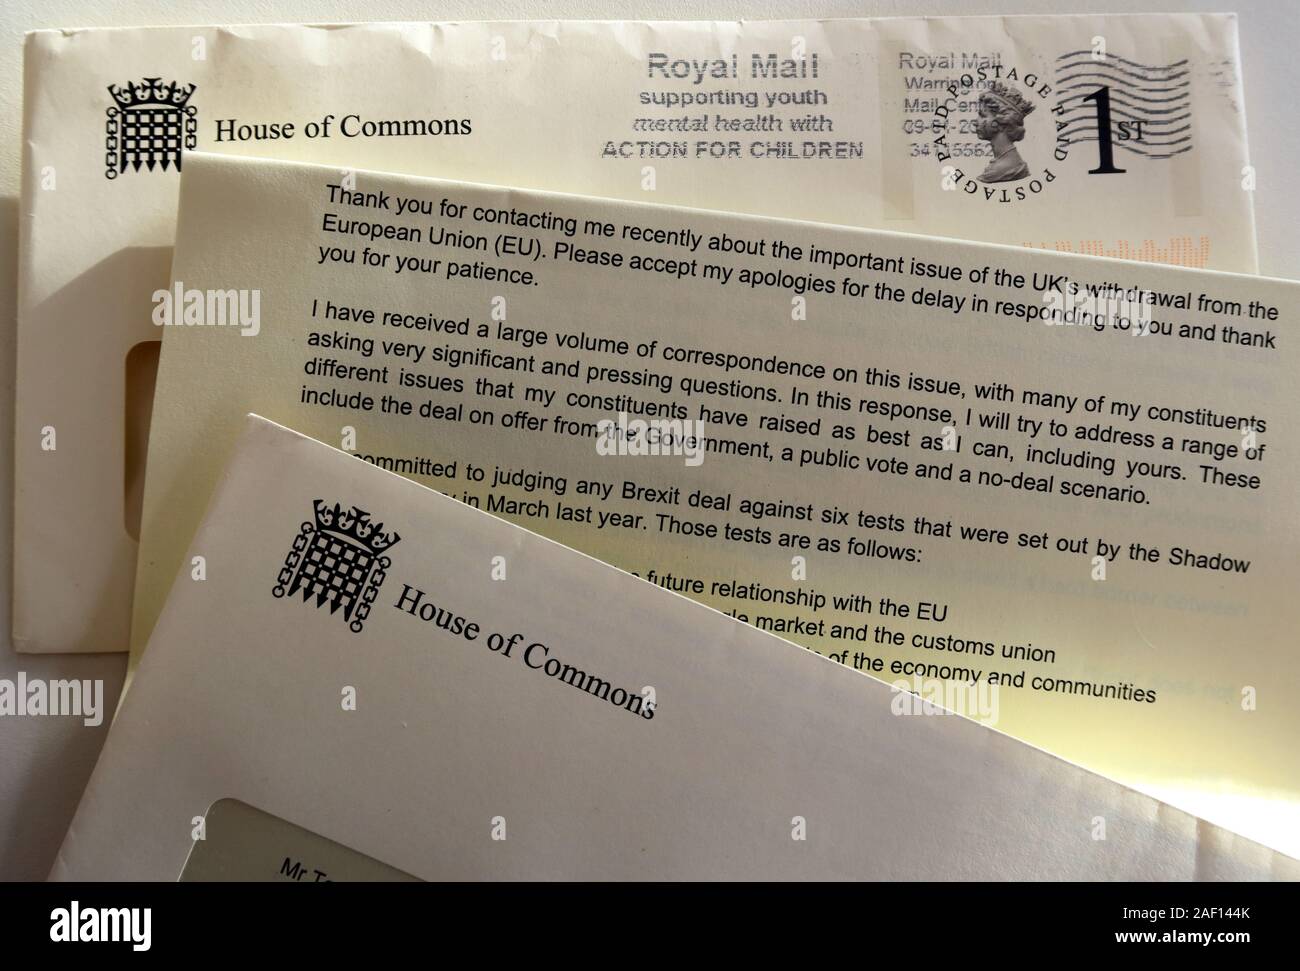 Letter on House of Commons Notepaper,from,SW1A 0AA,1st class from Faisal Rashid MP,December 2019 on Brexit Stock Photo